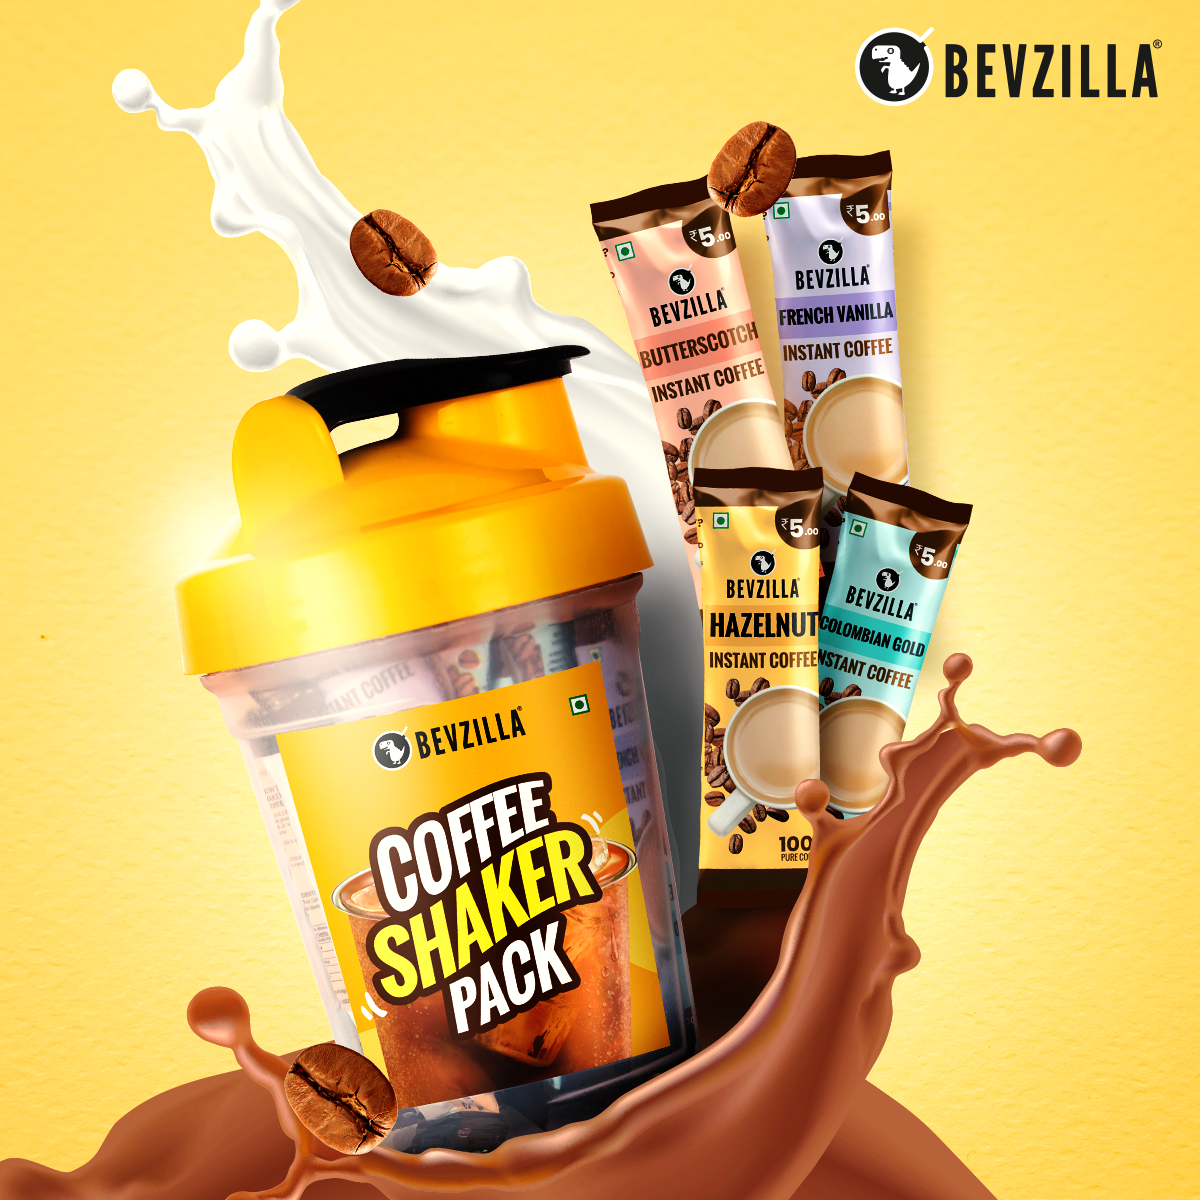 Bevzilla’s the Coffee Shaker Pack